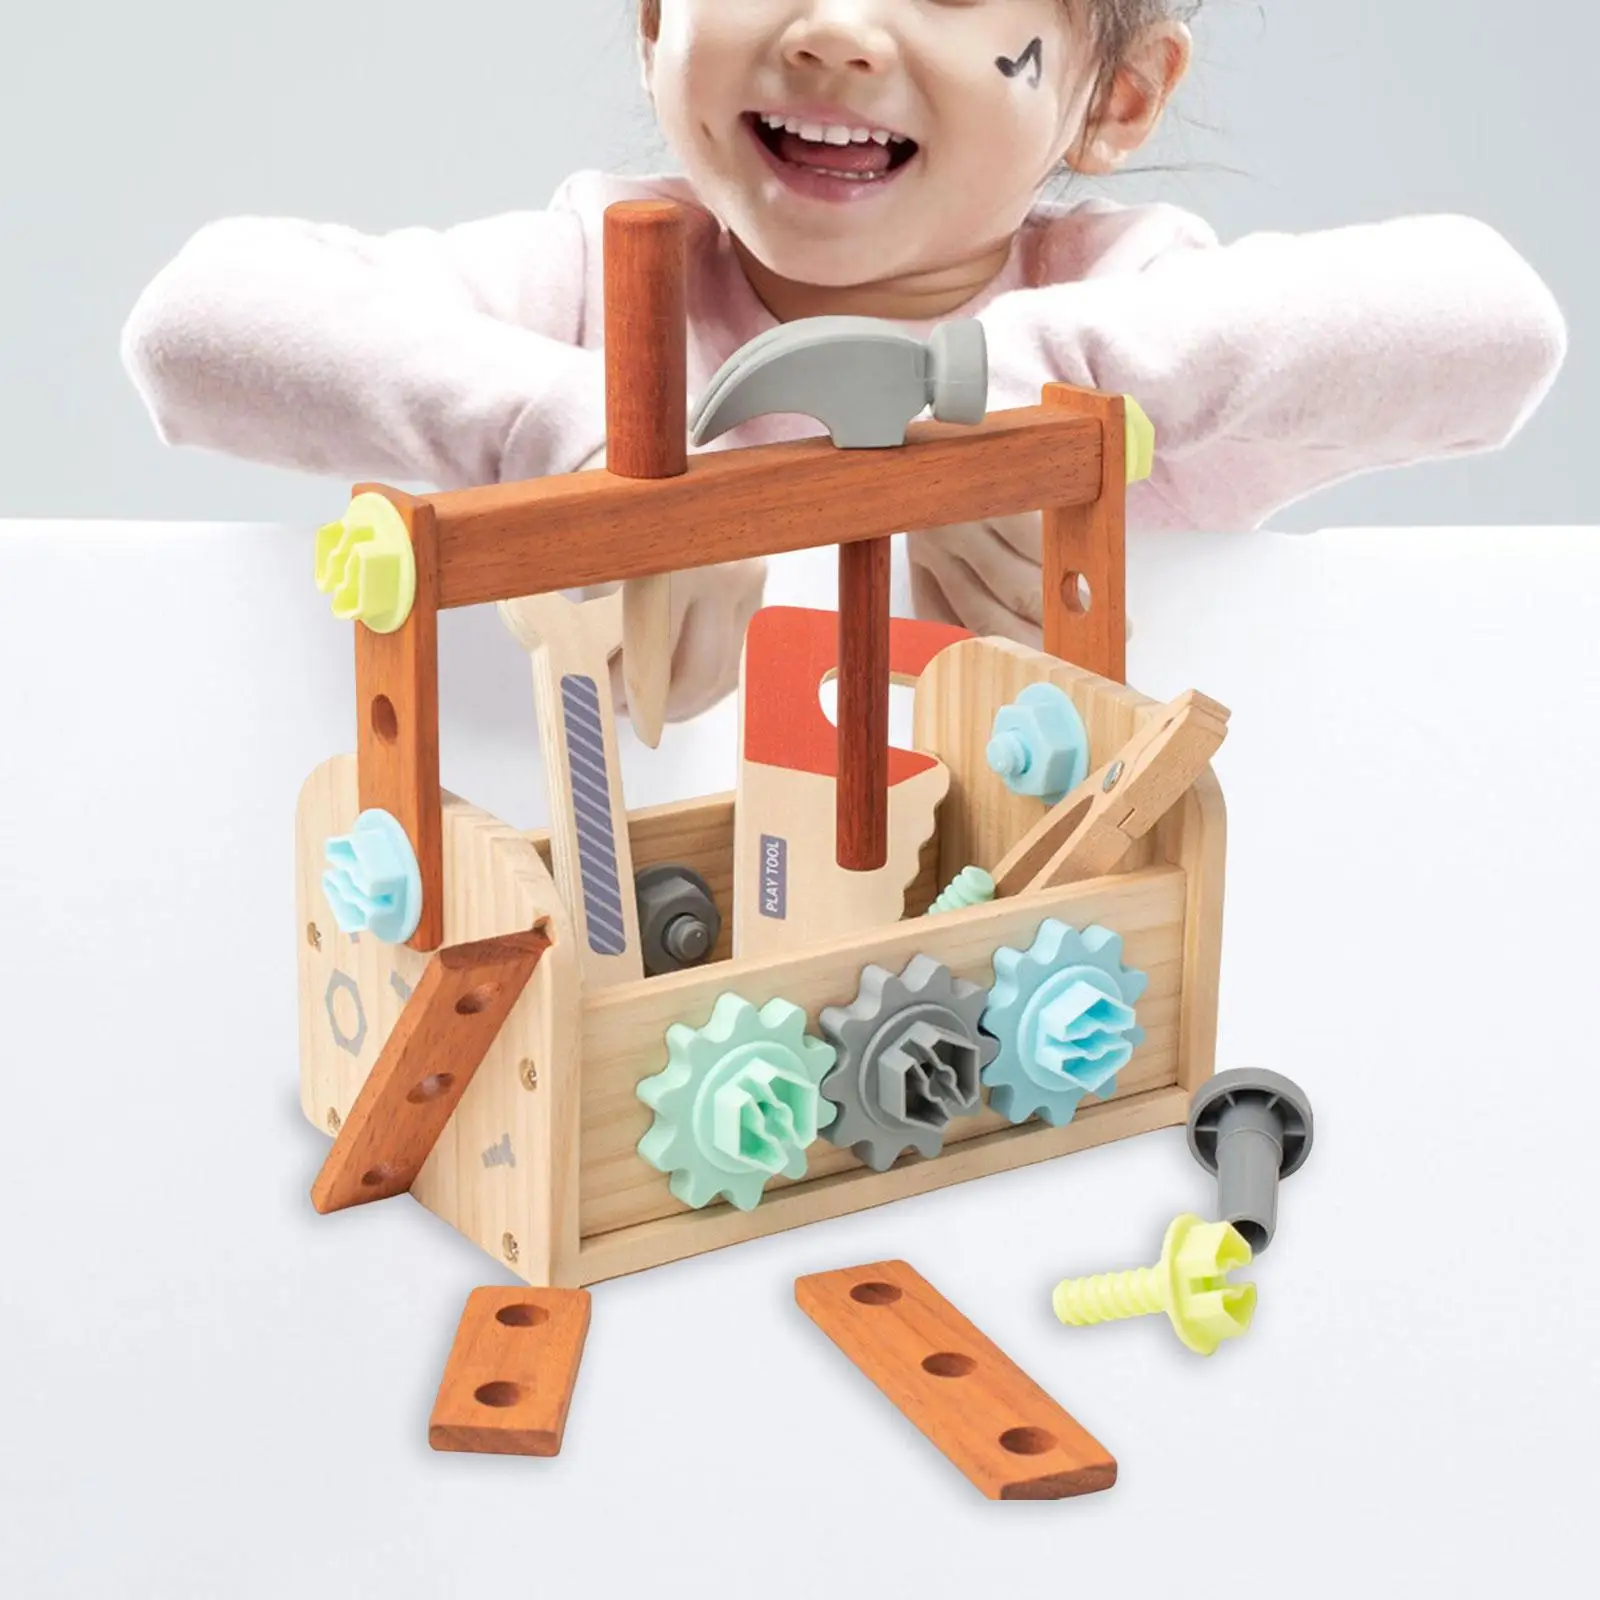 Kids Tool Set Pretend play toy montessori Educational Toy Birthday Gift Wooden Tool Toy Wooden Construction Toy for Toddlers